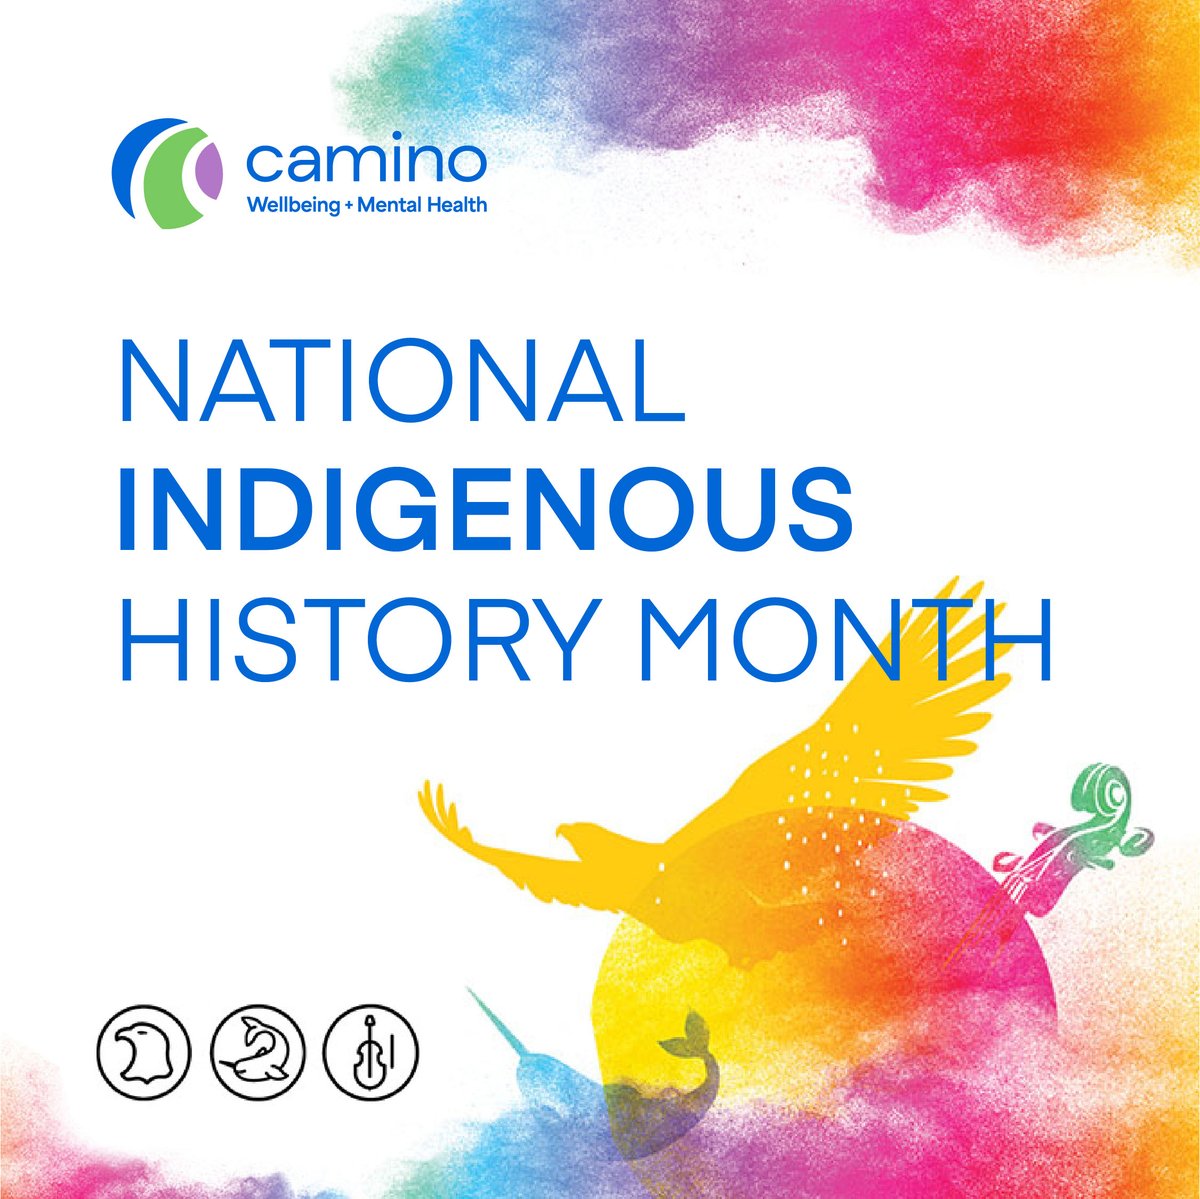 [Follow @CaminoWellbeing for more] June is National Indigenous History Month. Let’s recognize and celebrate the First Nations, Inuit, and Metis Peoples across Northern Turtle Island (the land we call Canada). Learn the calls to action and take steps toward reconciliation.